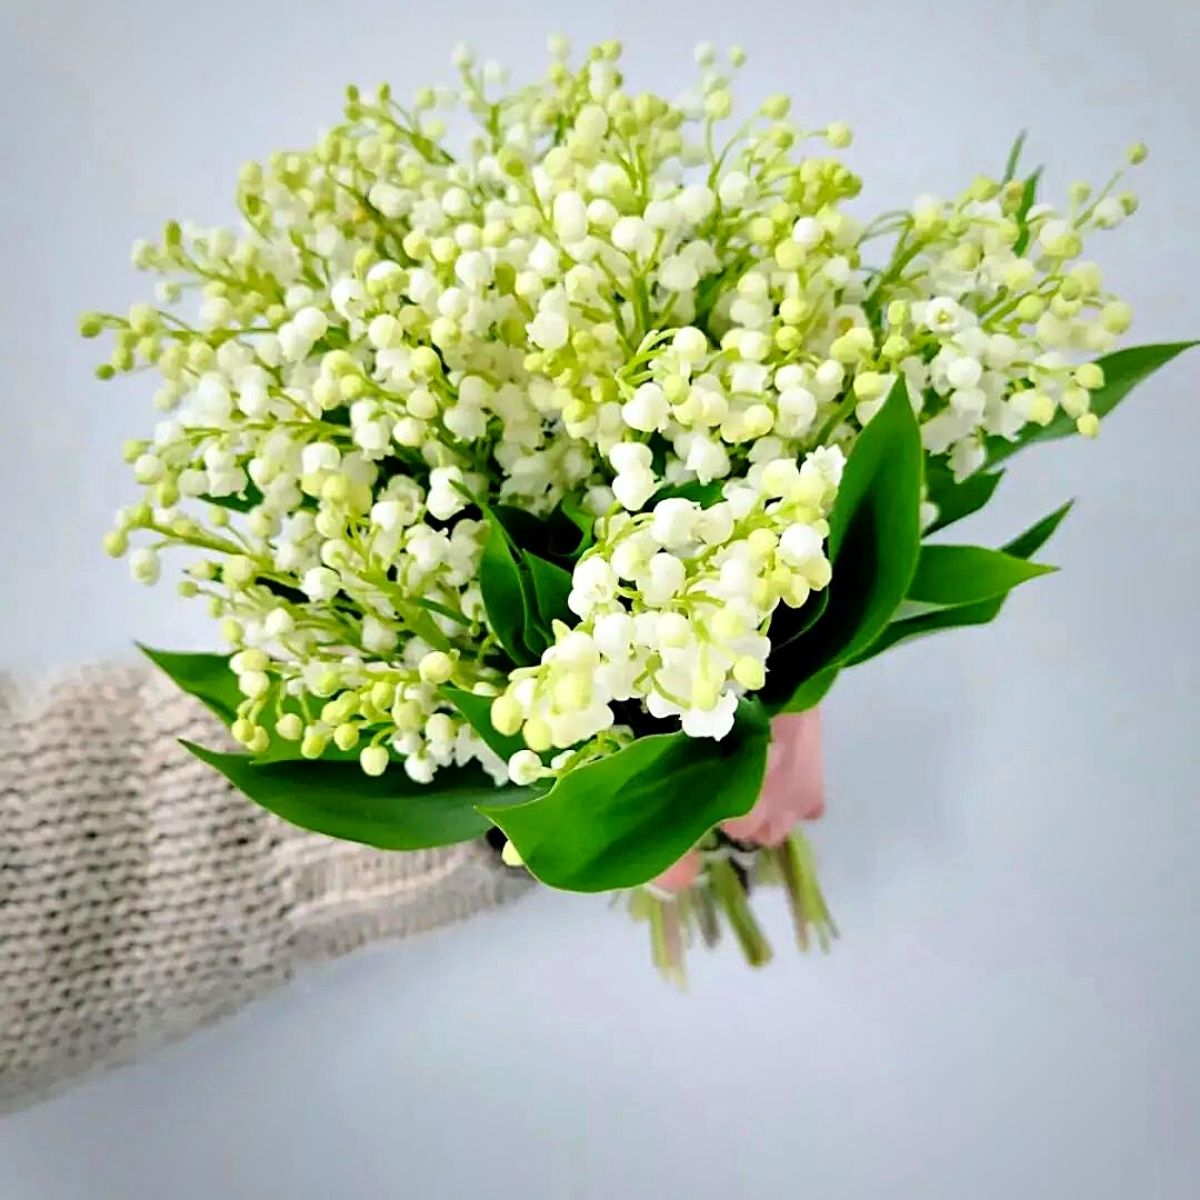 A bouquet of lily of the valley may birth flowers